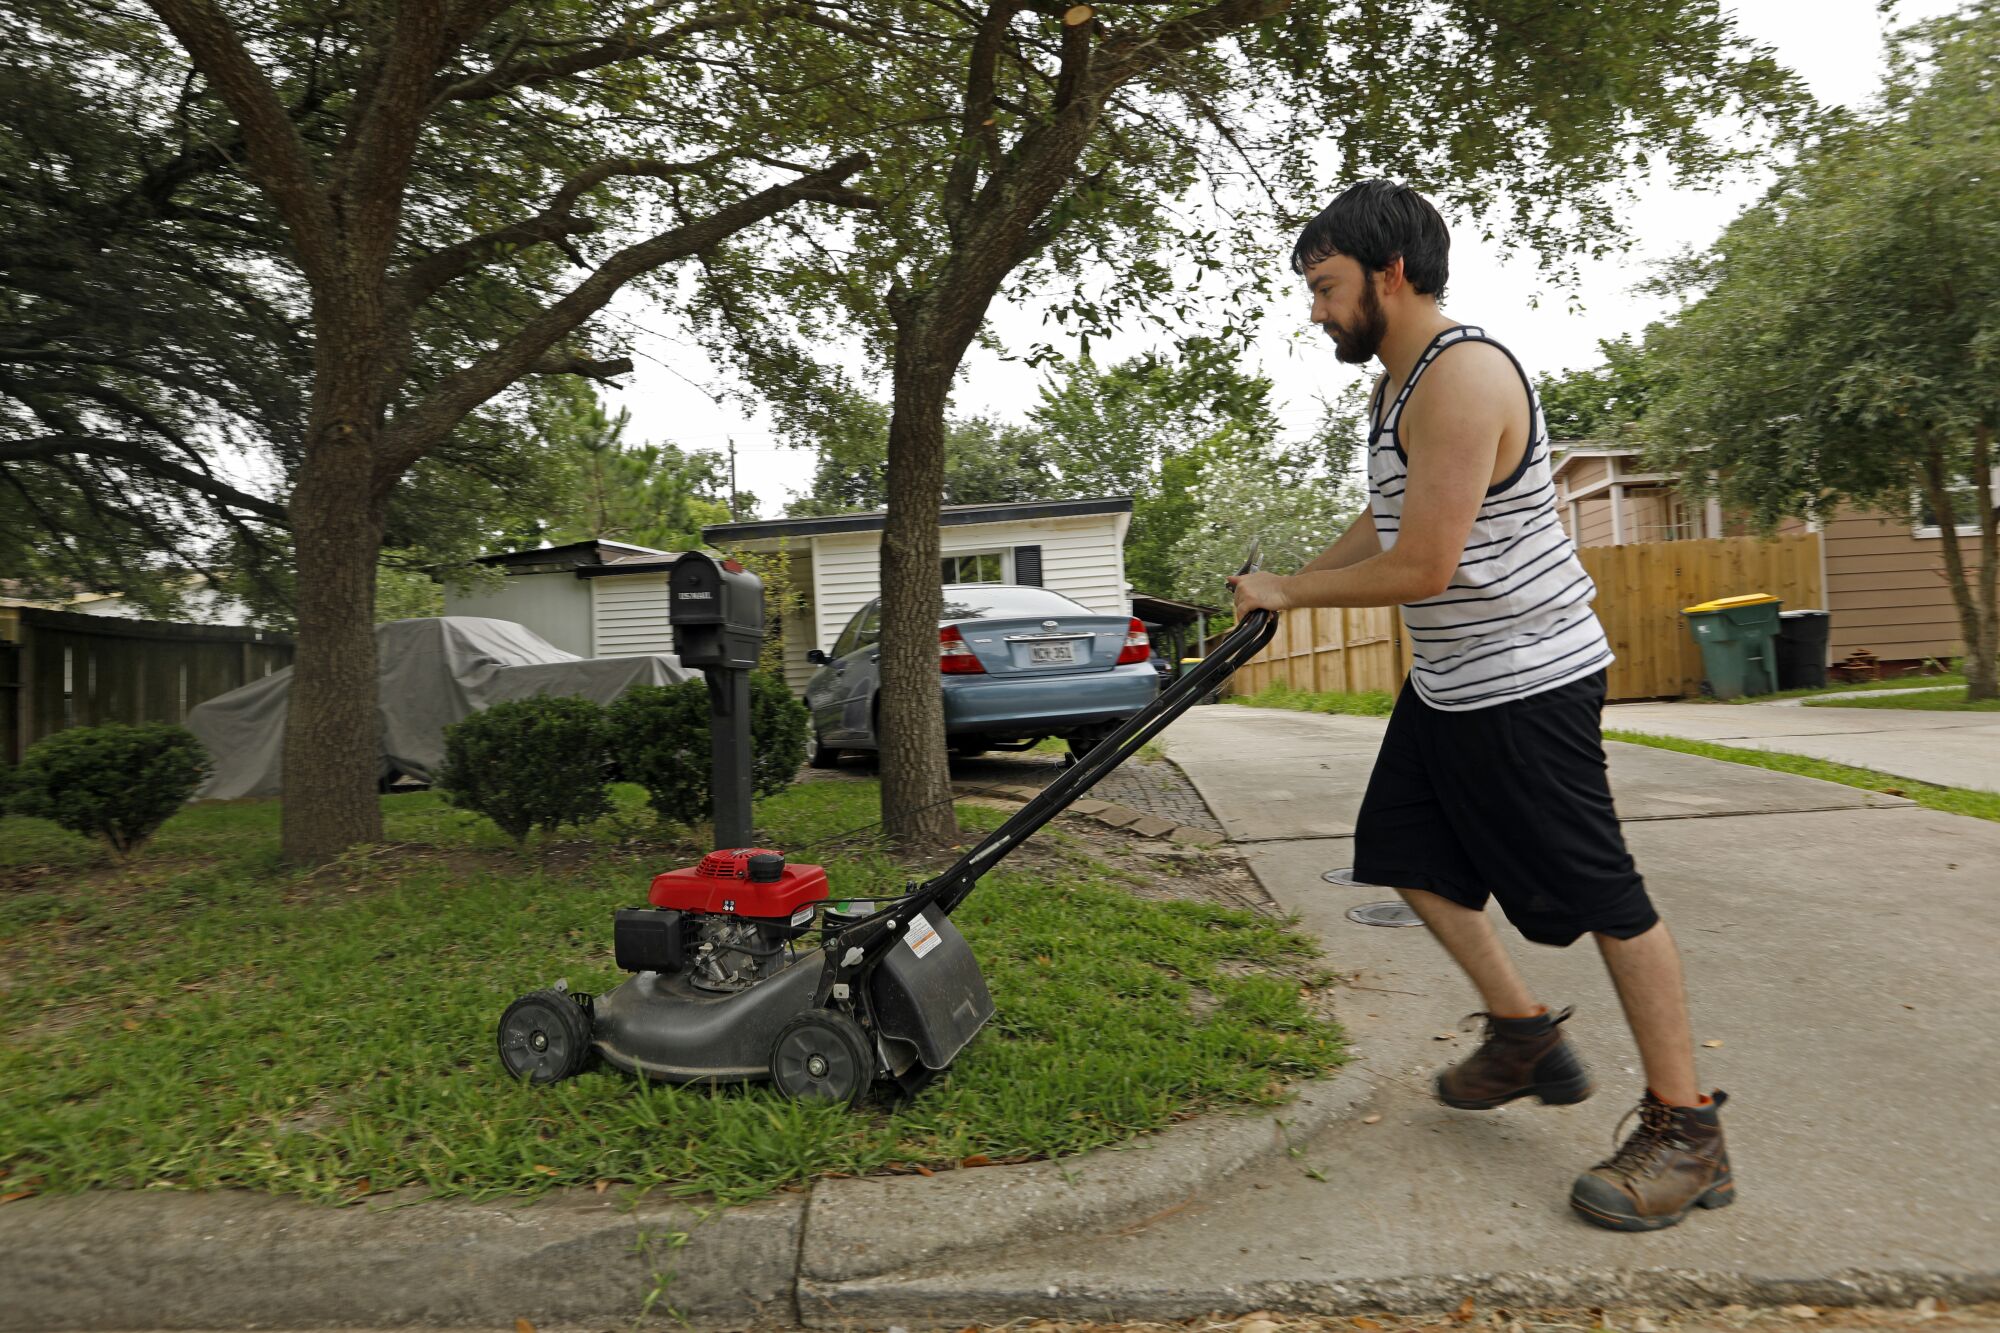 Daniel Herrera, 26, was mowing his own lawn this week after losing contract jobs as an electrician's helper at nearby plants.